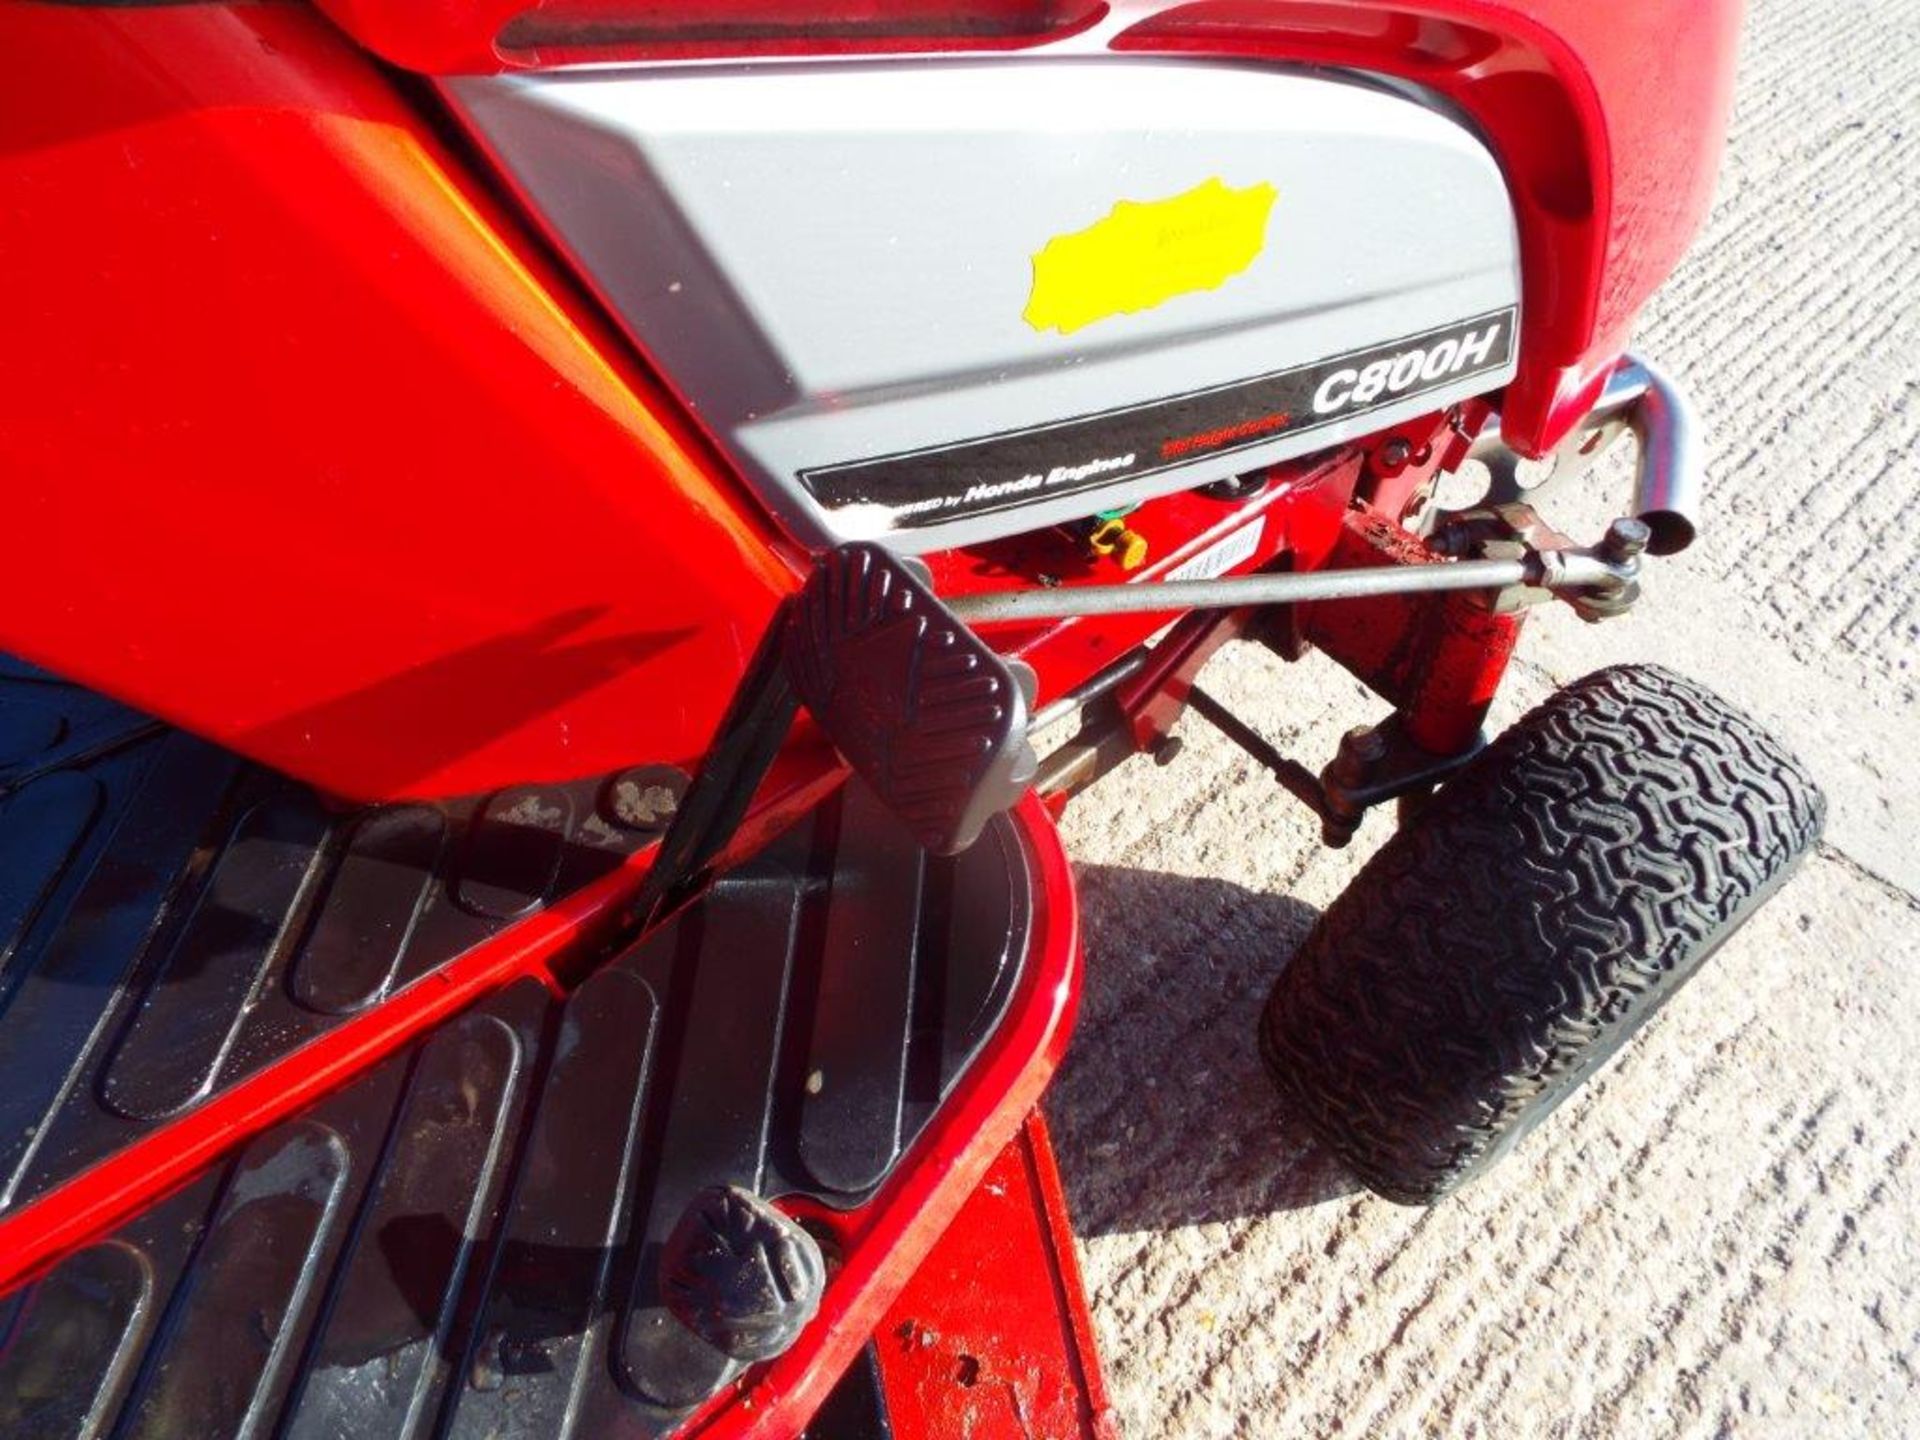 Countax C800H Ride On Mower with Rear Brush and Grass Collector - Image 14 of 20